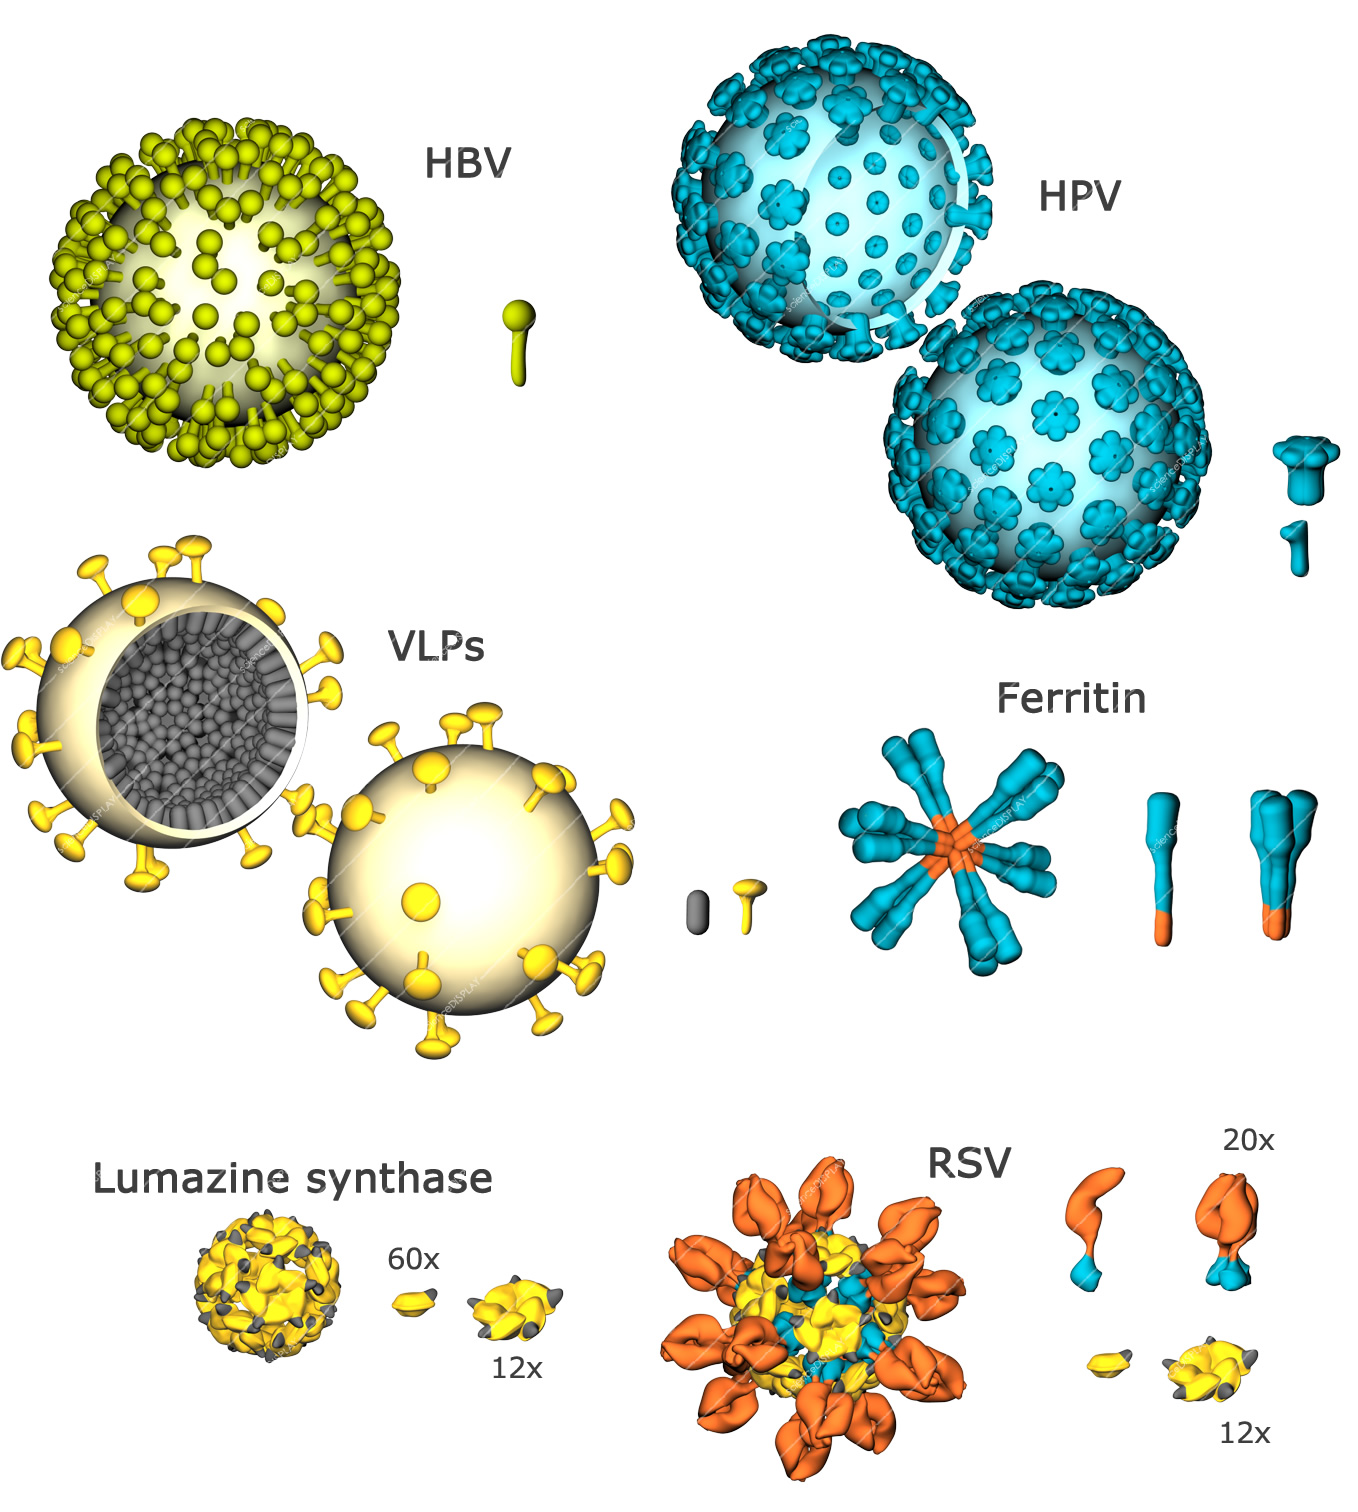 VLPs - Virus like particles